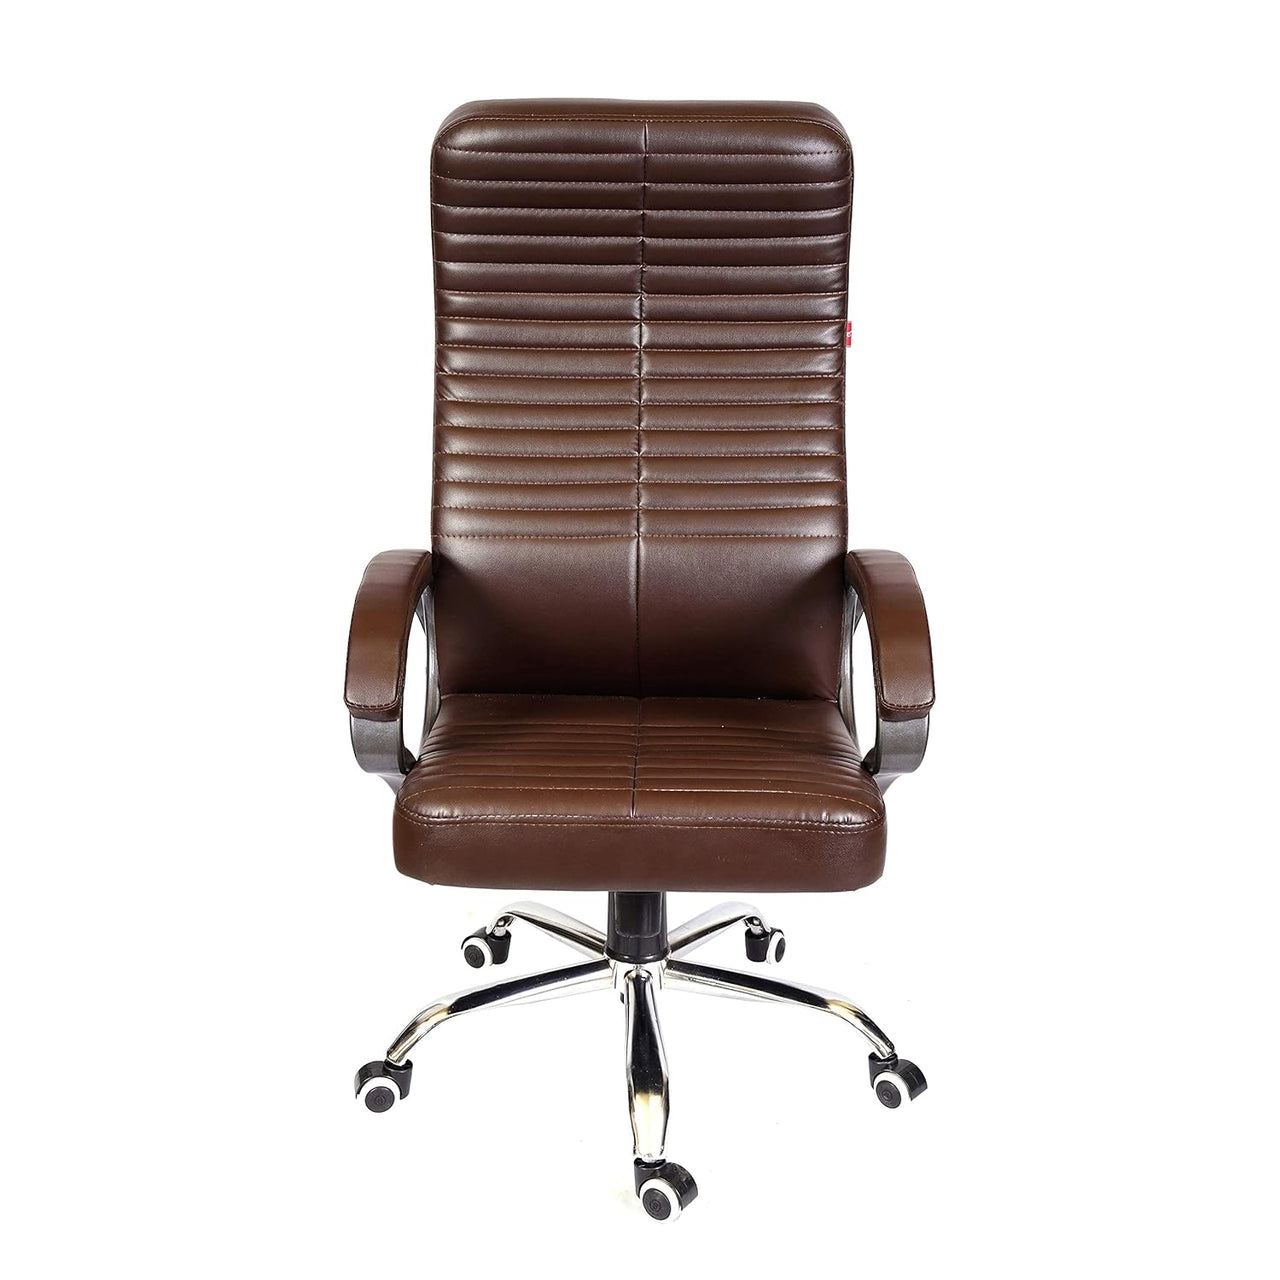 Roll 3 Executive High Back Leatherette Chair (Brown)